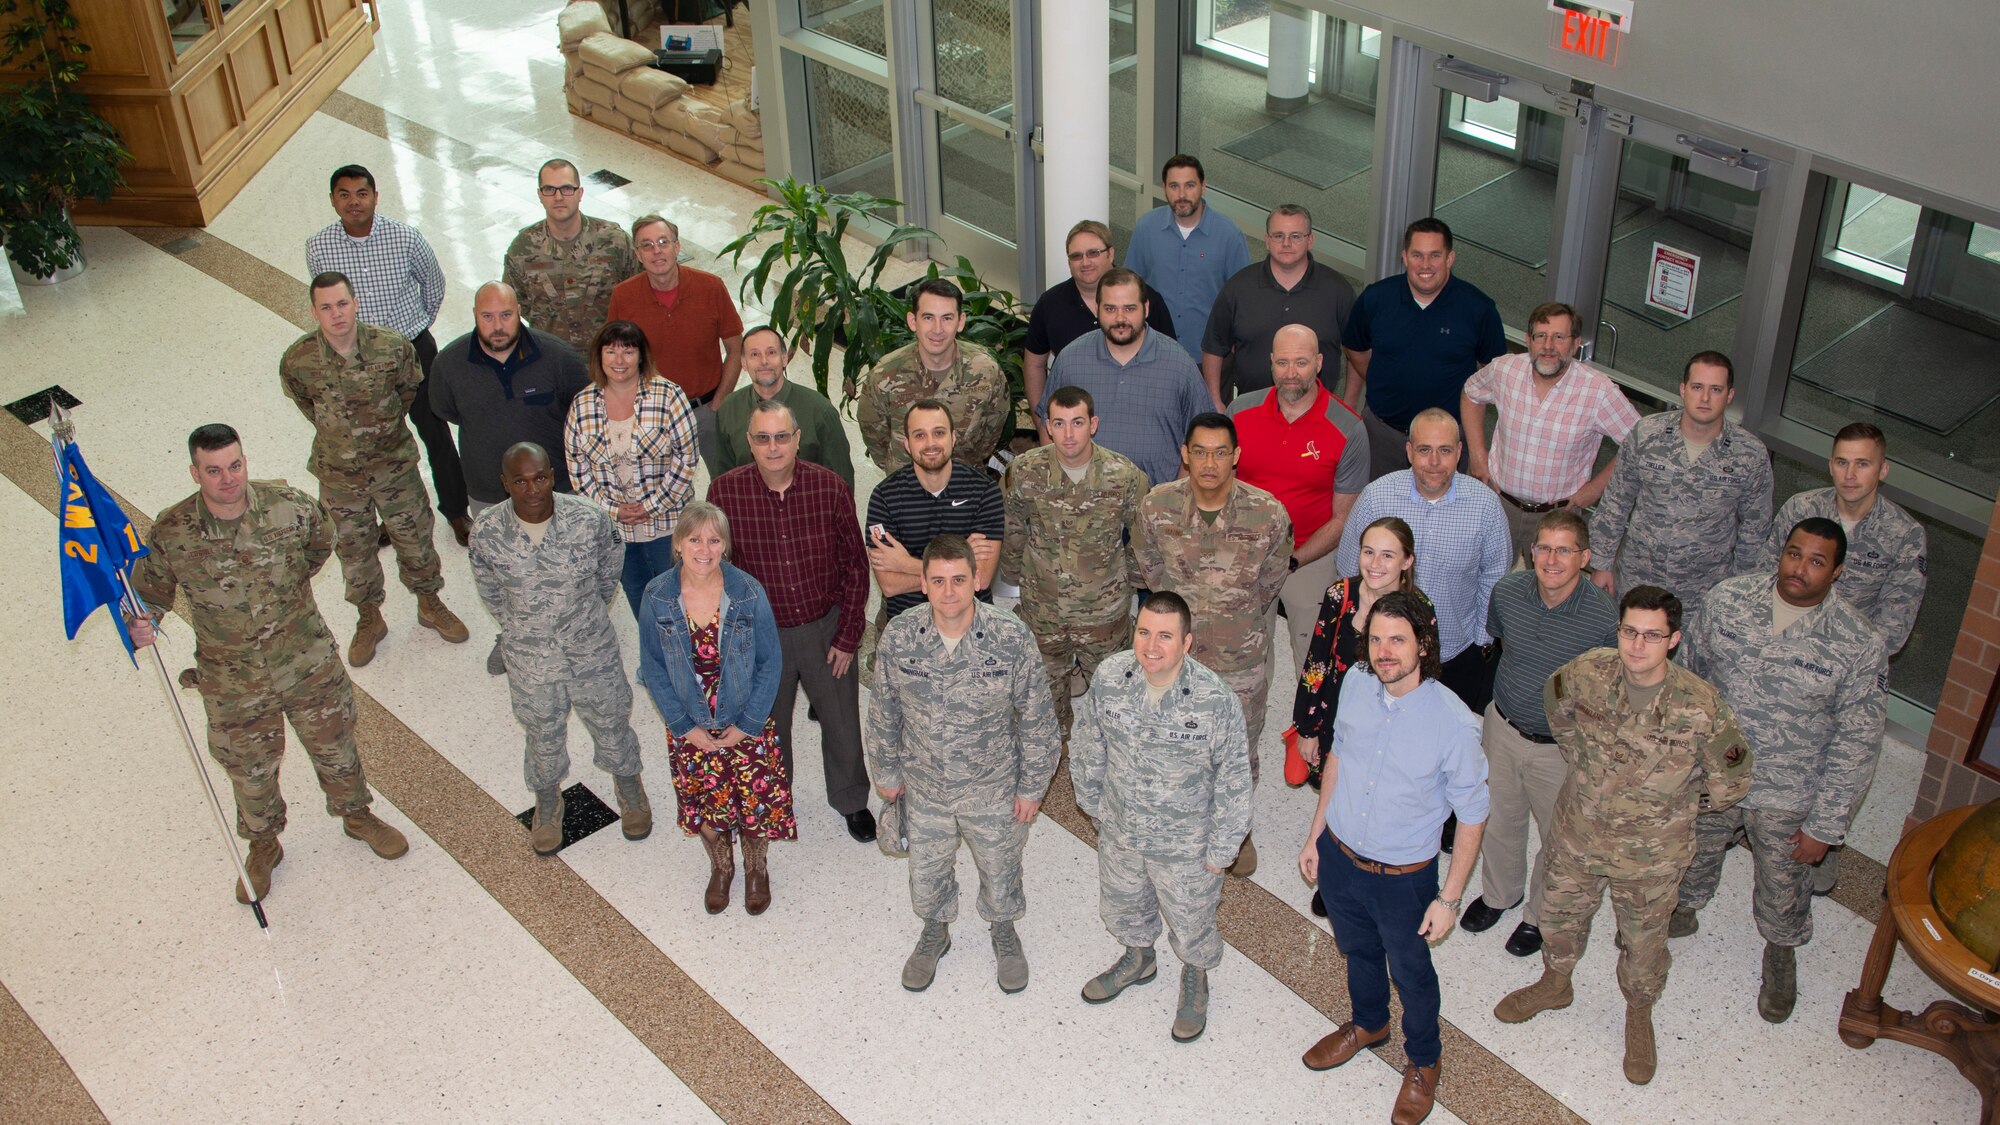 Group photo of 16th Weather Squadron members from above.